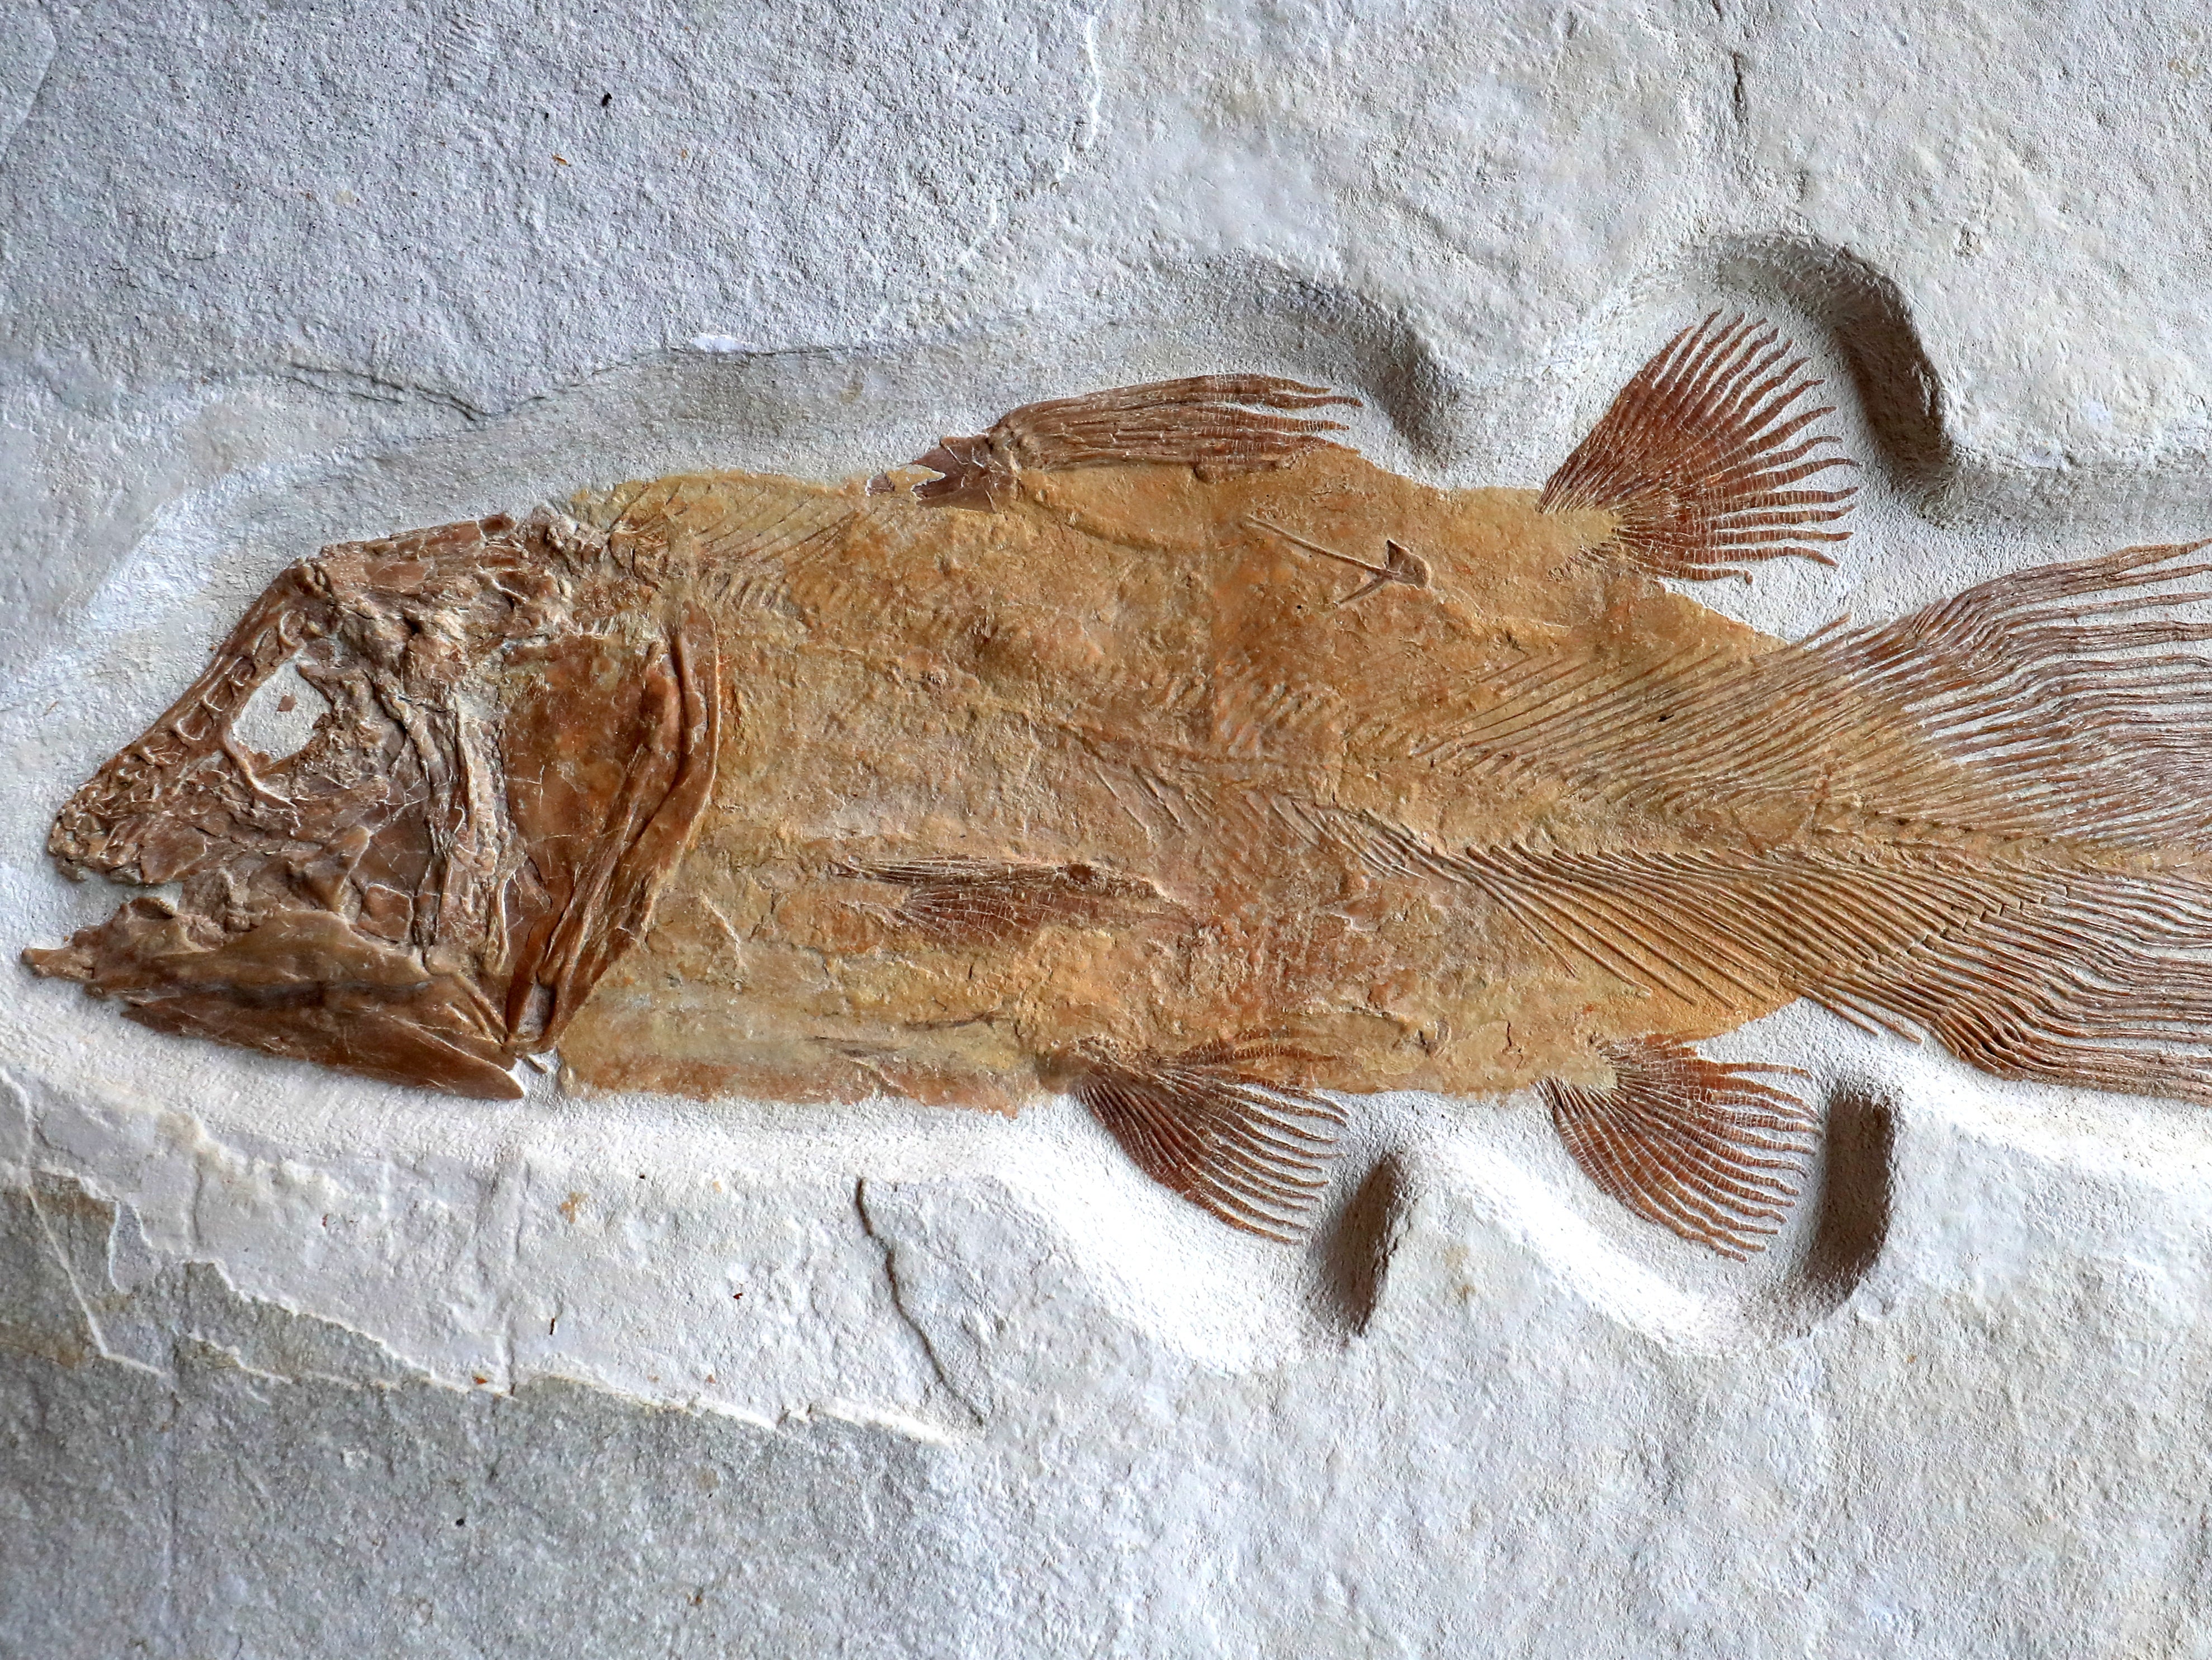 An example of what a very rare complete Coelacanth fossil looks like